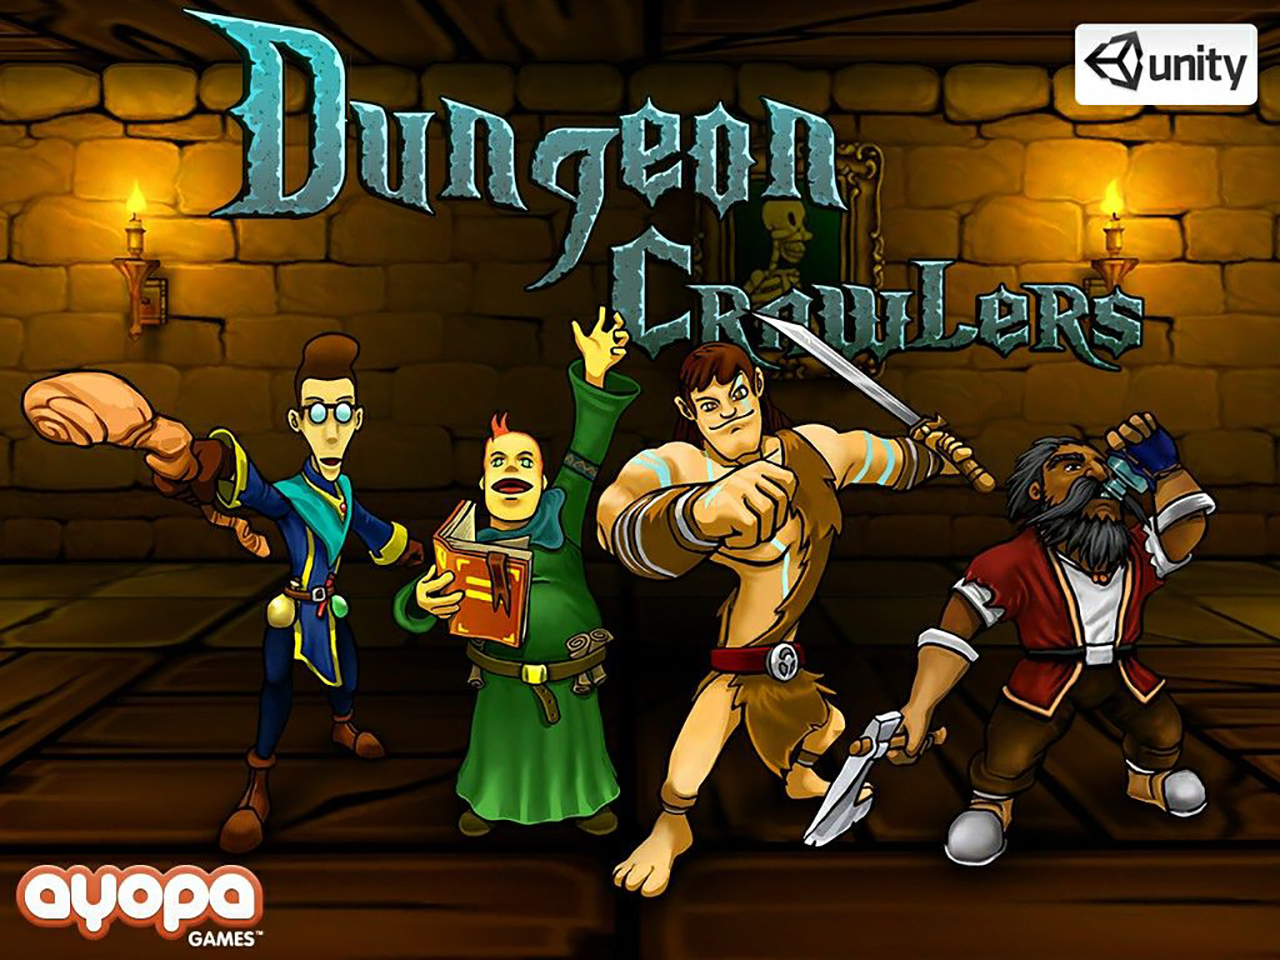 Dungeon Crawlers HD Pics, Video Game Collection